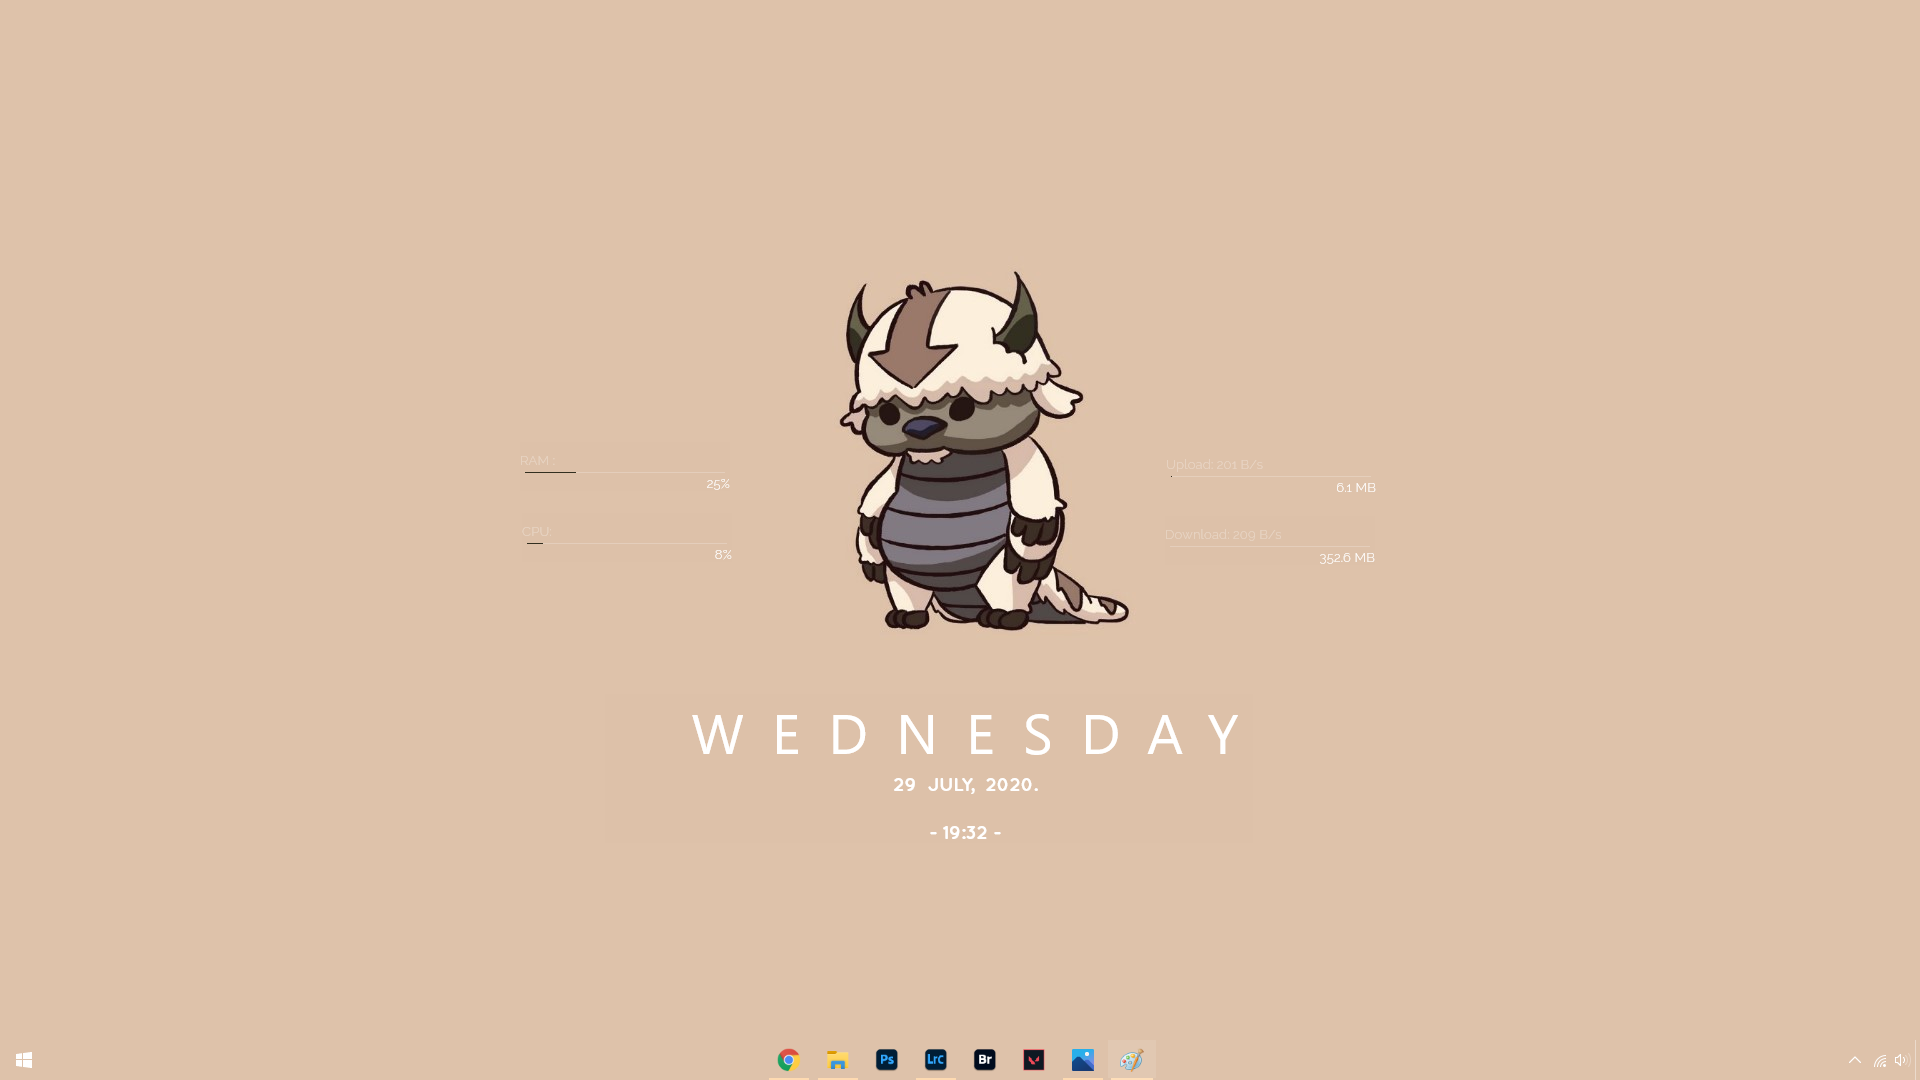 Appa Wallpapers